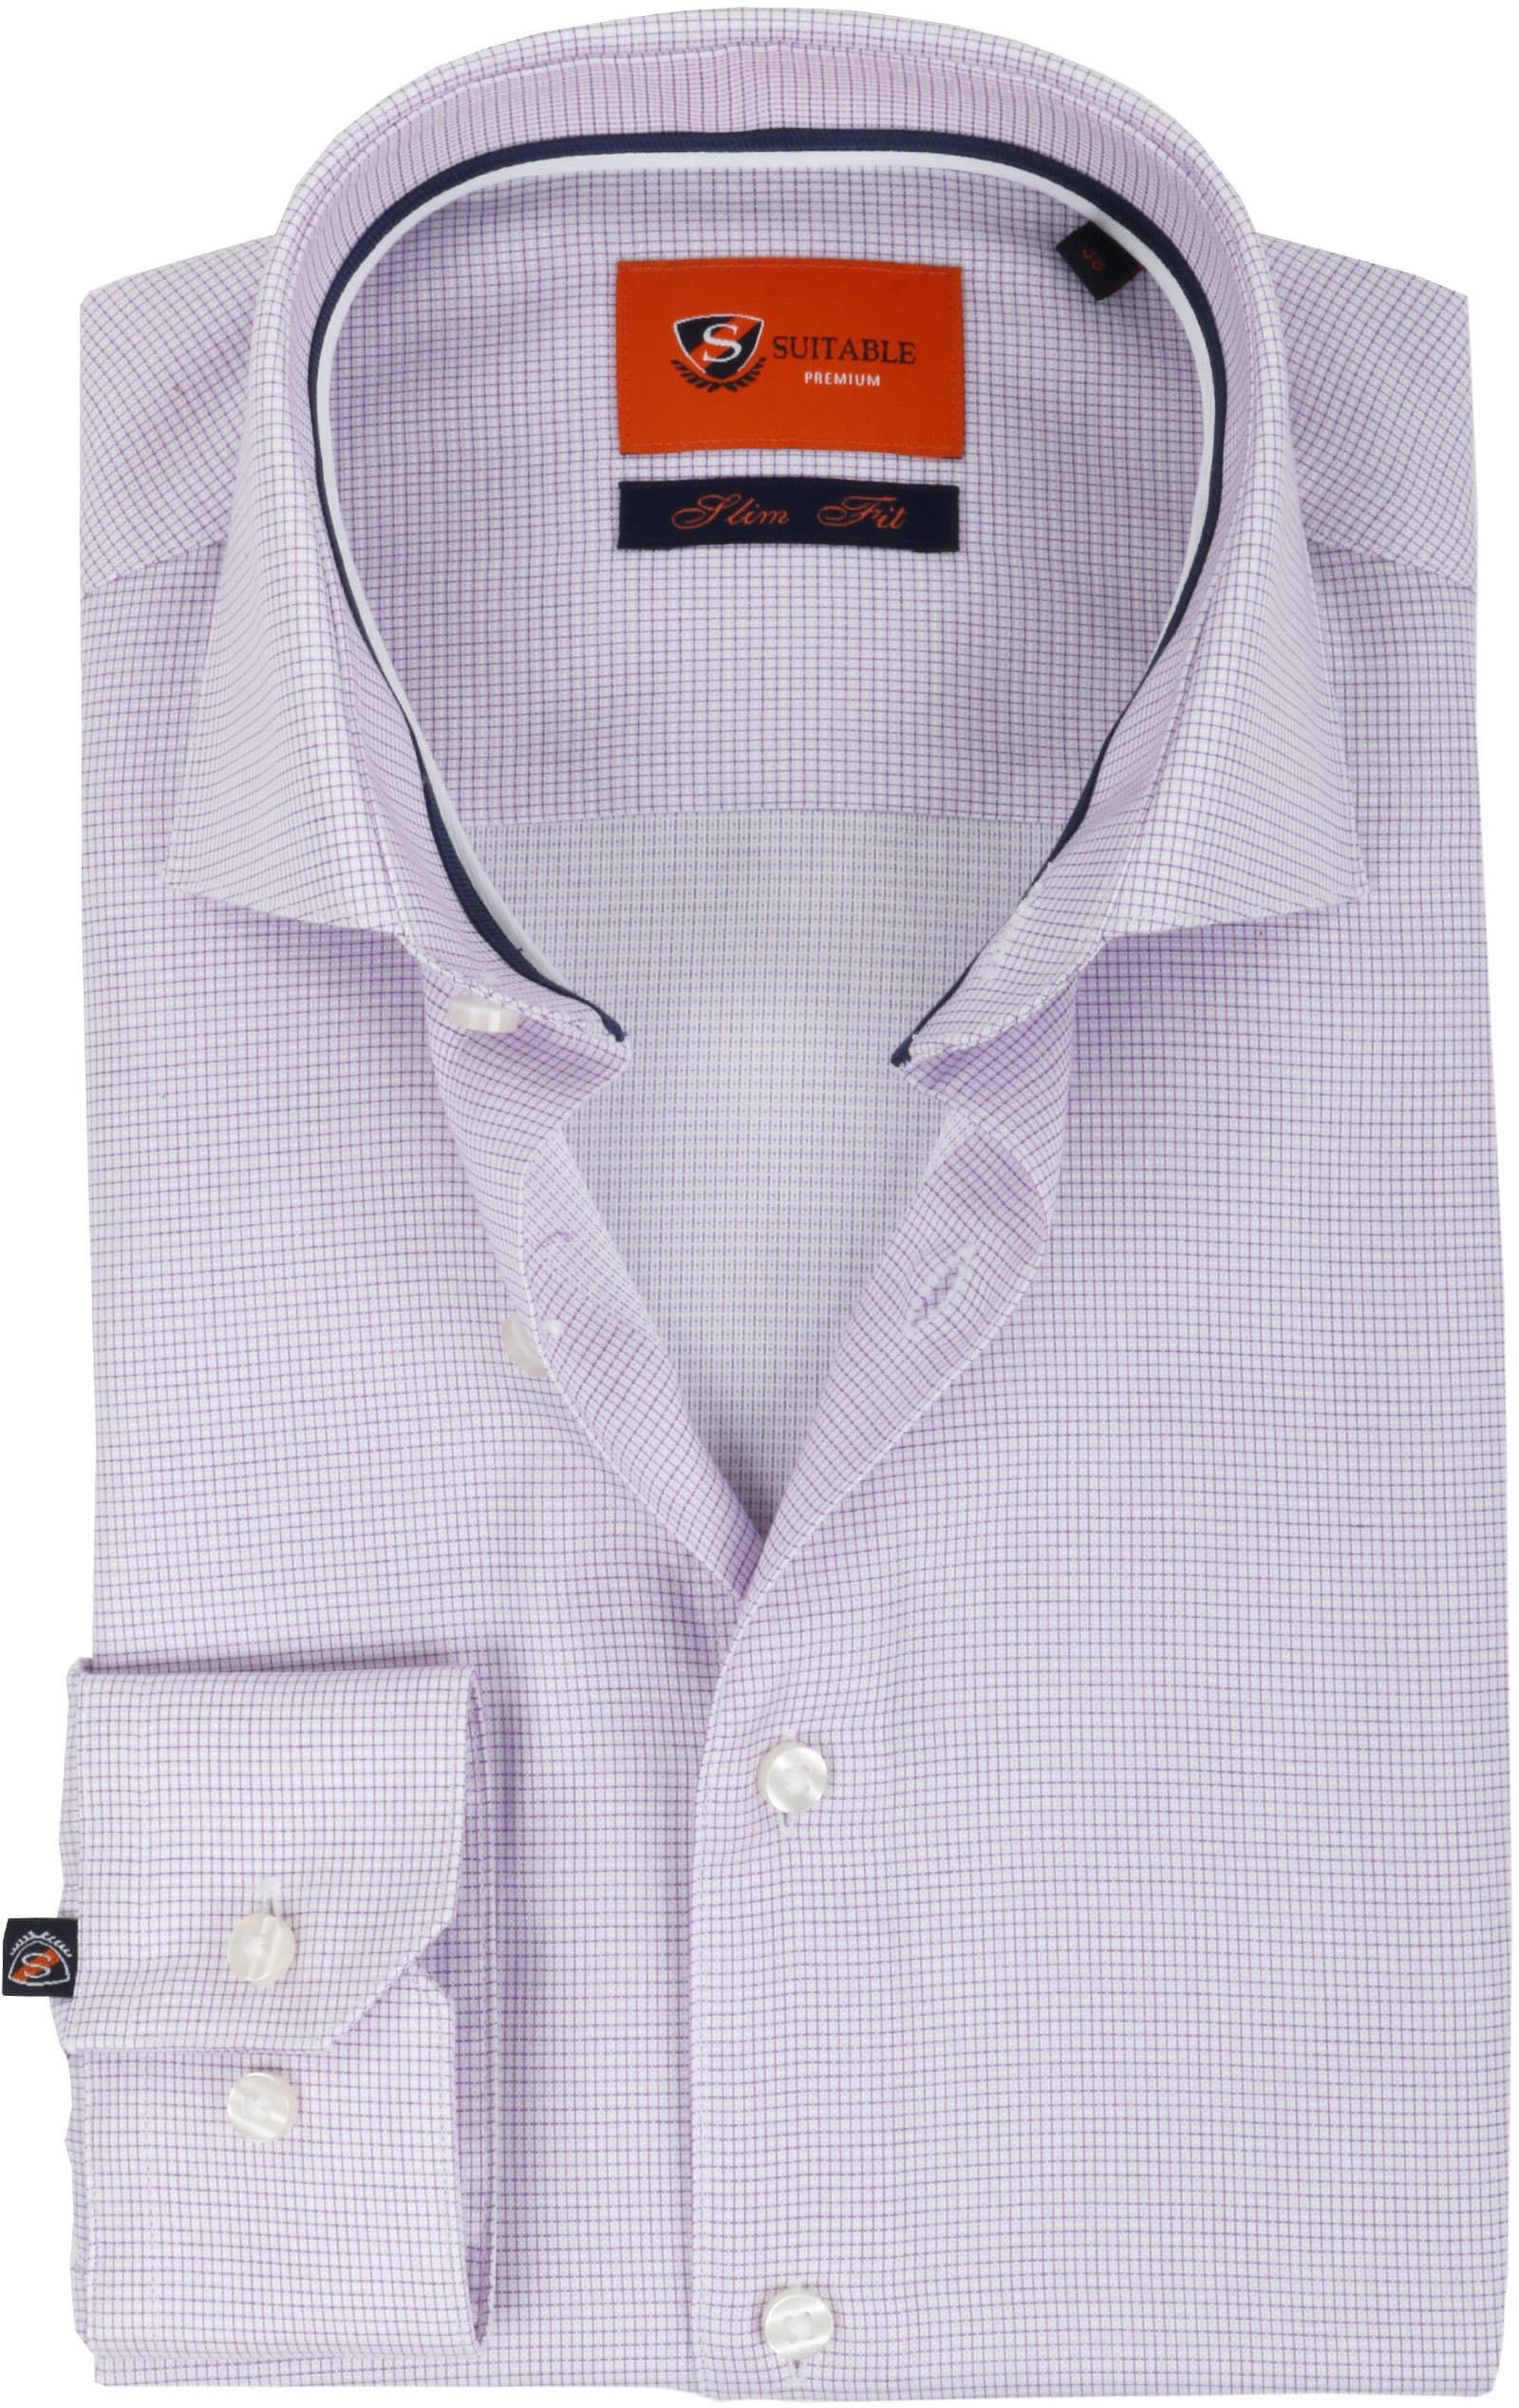 Suitable Shirt Checkered Purple size 15 1/2